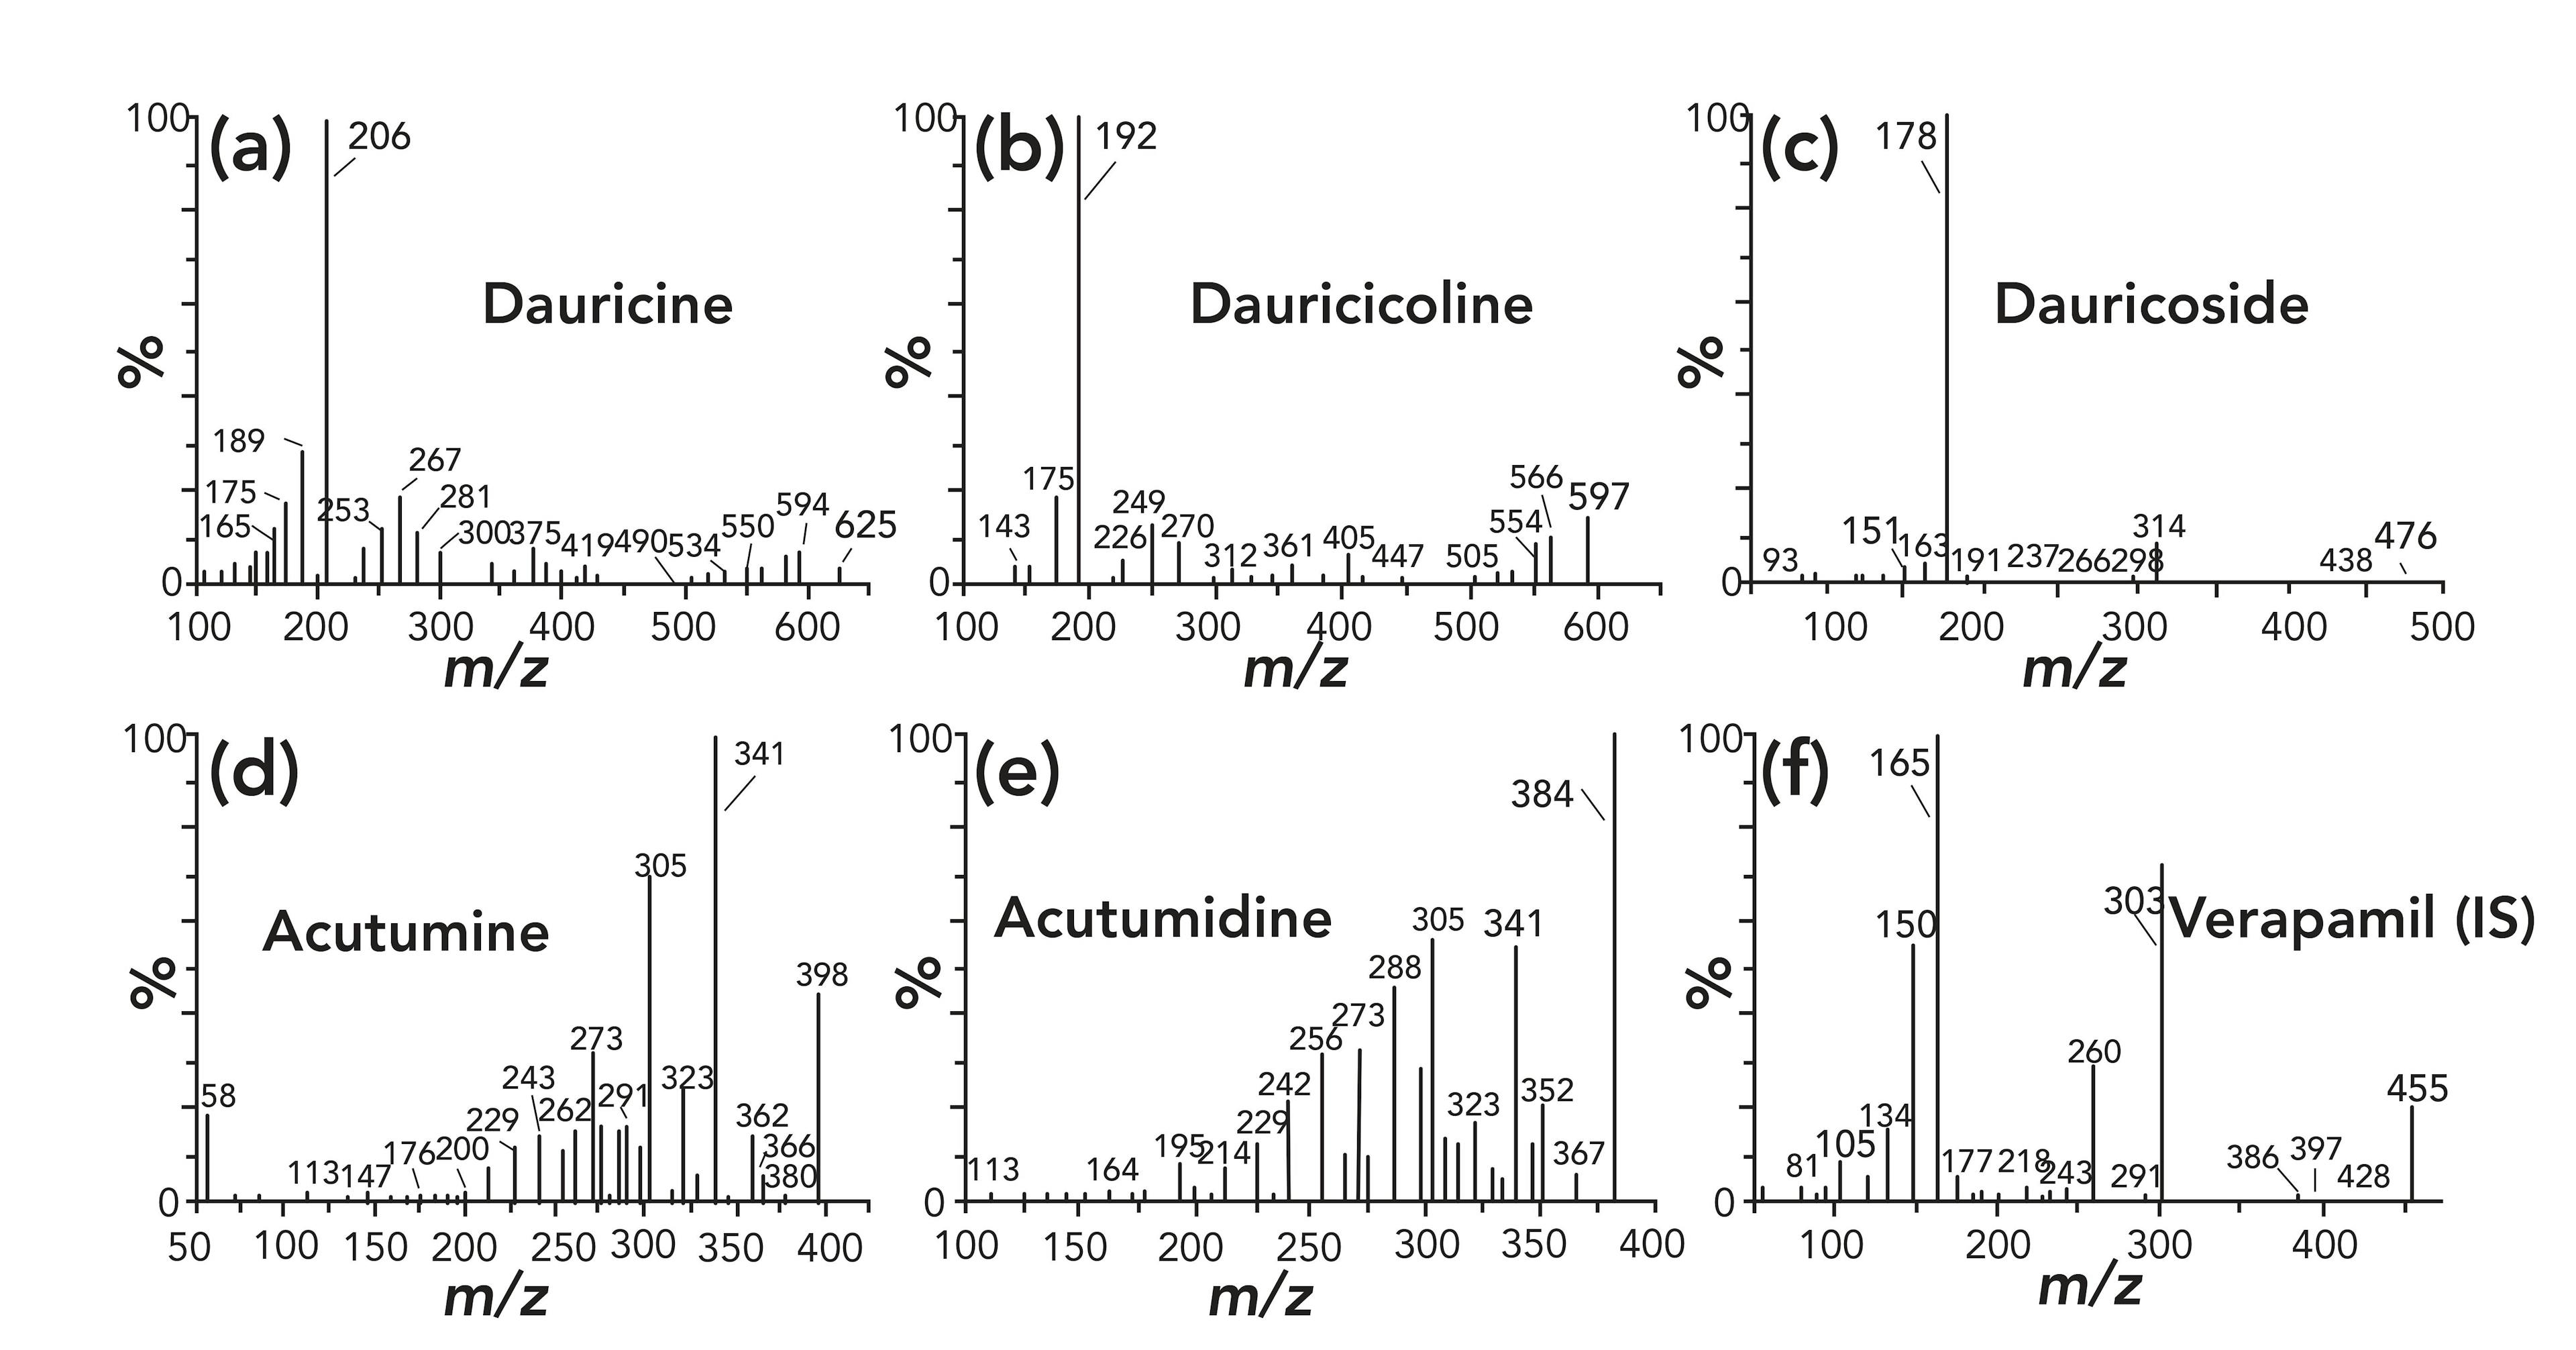 FIGURE 2: Product ion mass spectra of 5 active components and the IS in positive electrospray ionization mode: (a) dauricine; (b) dauricicoline; (c) dauricoside; (d) acutumine; (e) acutumidine; (f) verapamil (IS). Axes labels for all figures are m/z for x-axis and percent (%) for y-axis.